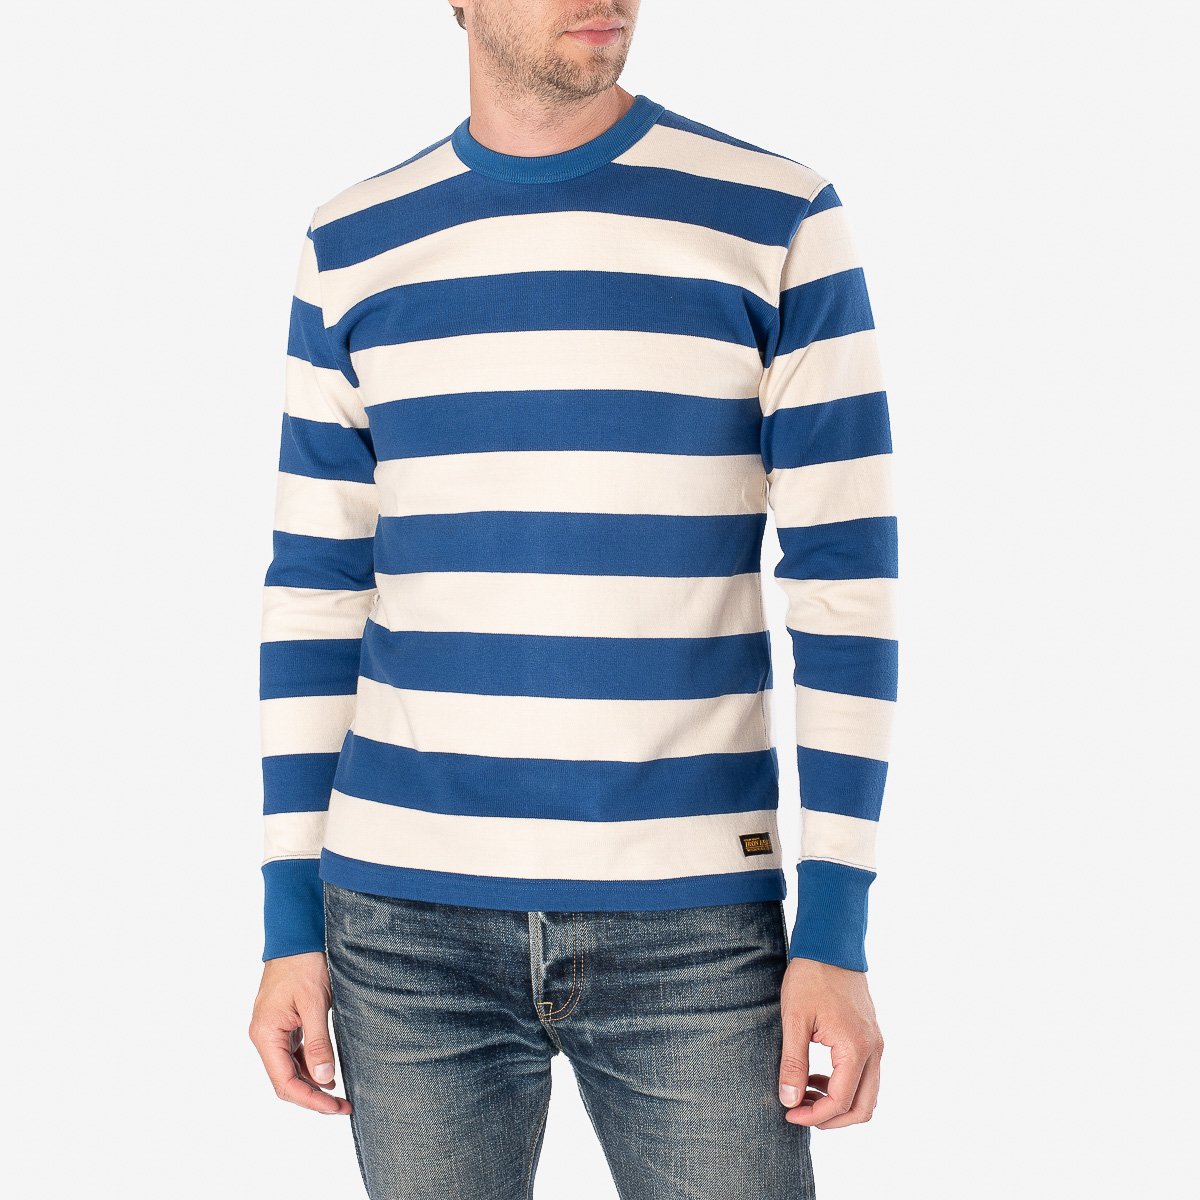 Iron Heart 11oz Knitted Cotton Long-Sleeved Sweater - Blue/White